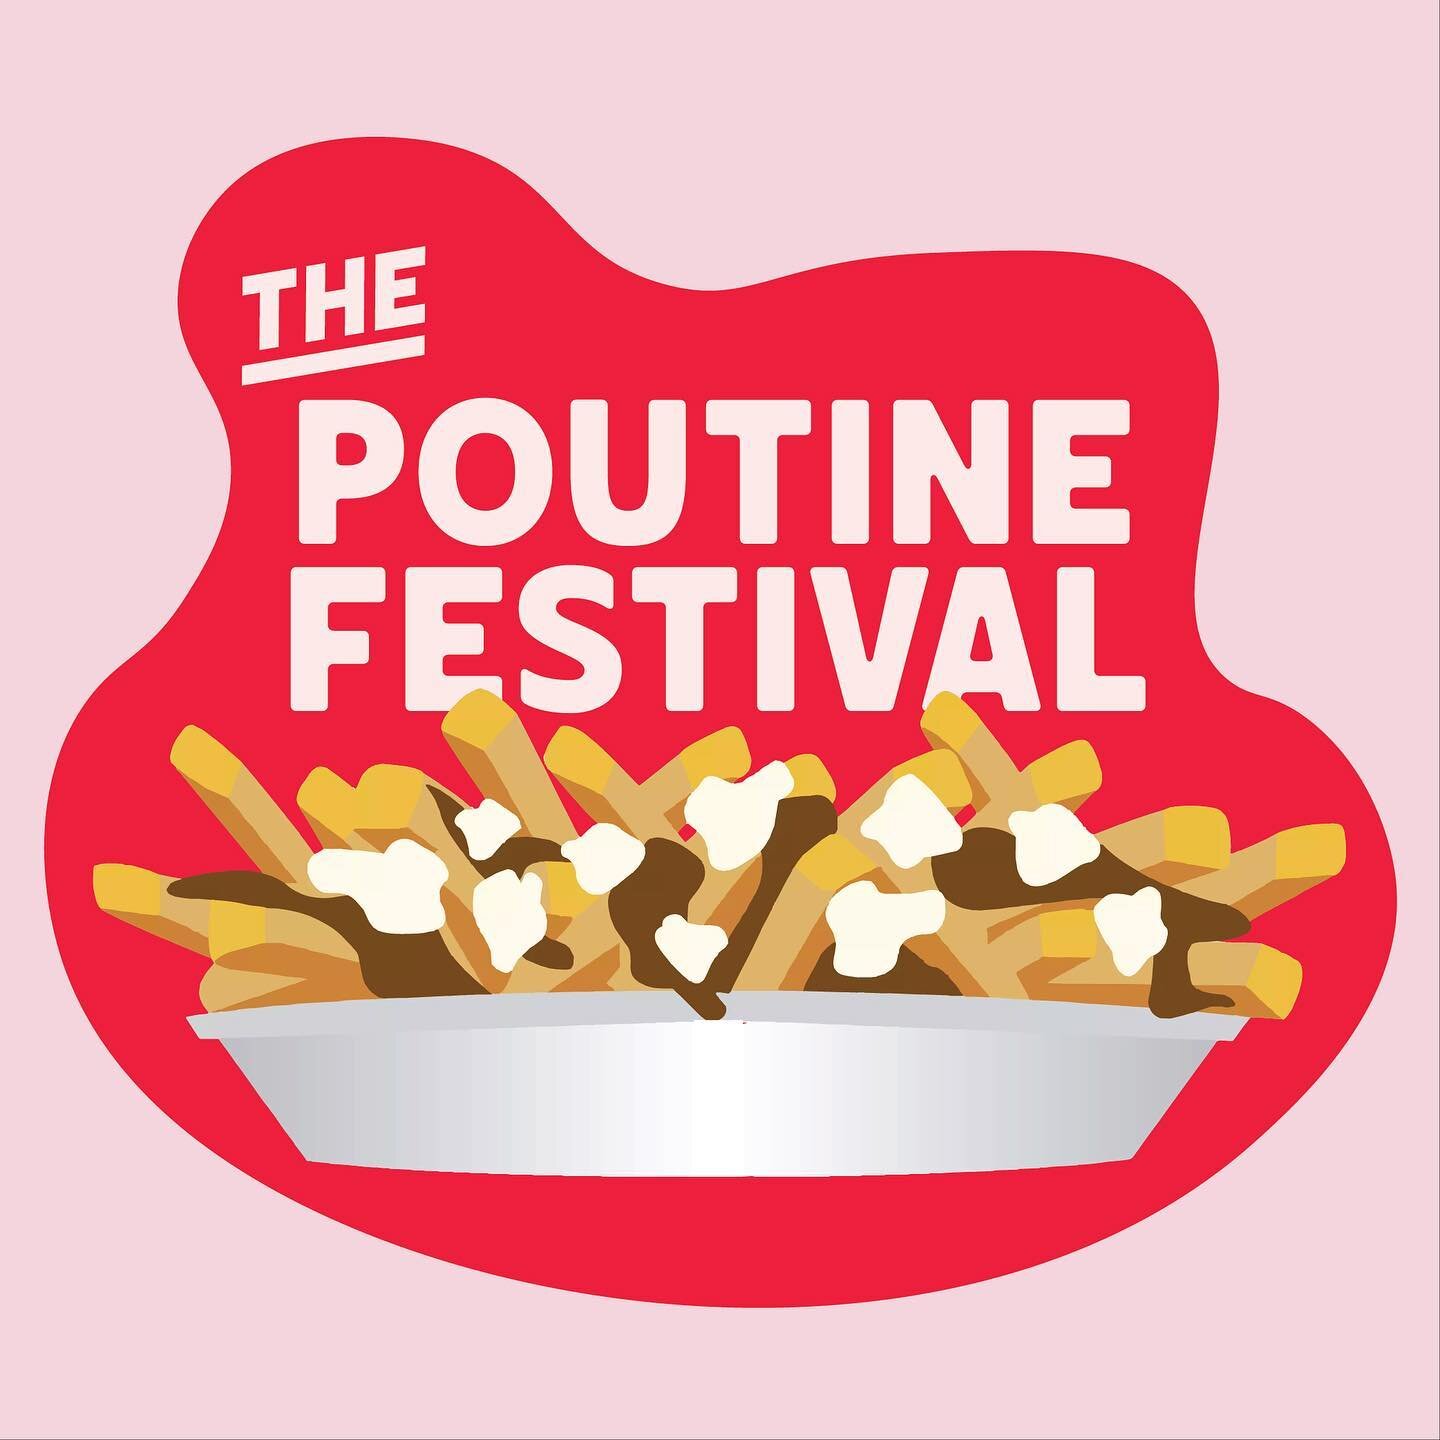 The O.G Canadian comfort food celebration is back for the first time since pre-spicy cough days on Saturday 27th August and we couldn't be happier! 🇨🇦

Legendary Food Trucks and Stalls will come together to bring you the best Poutine in Melbourne, 